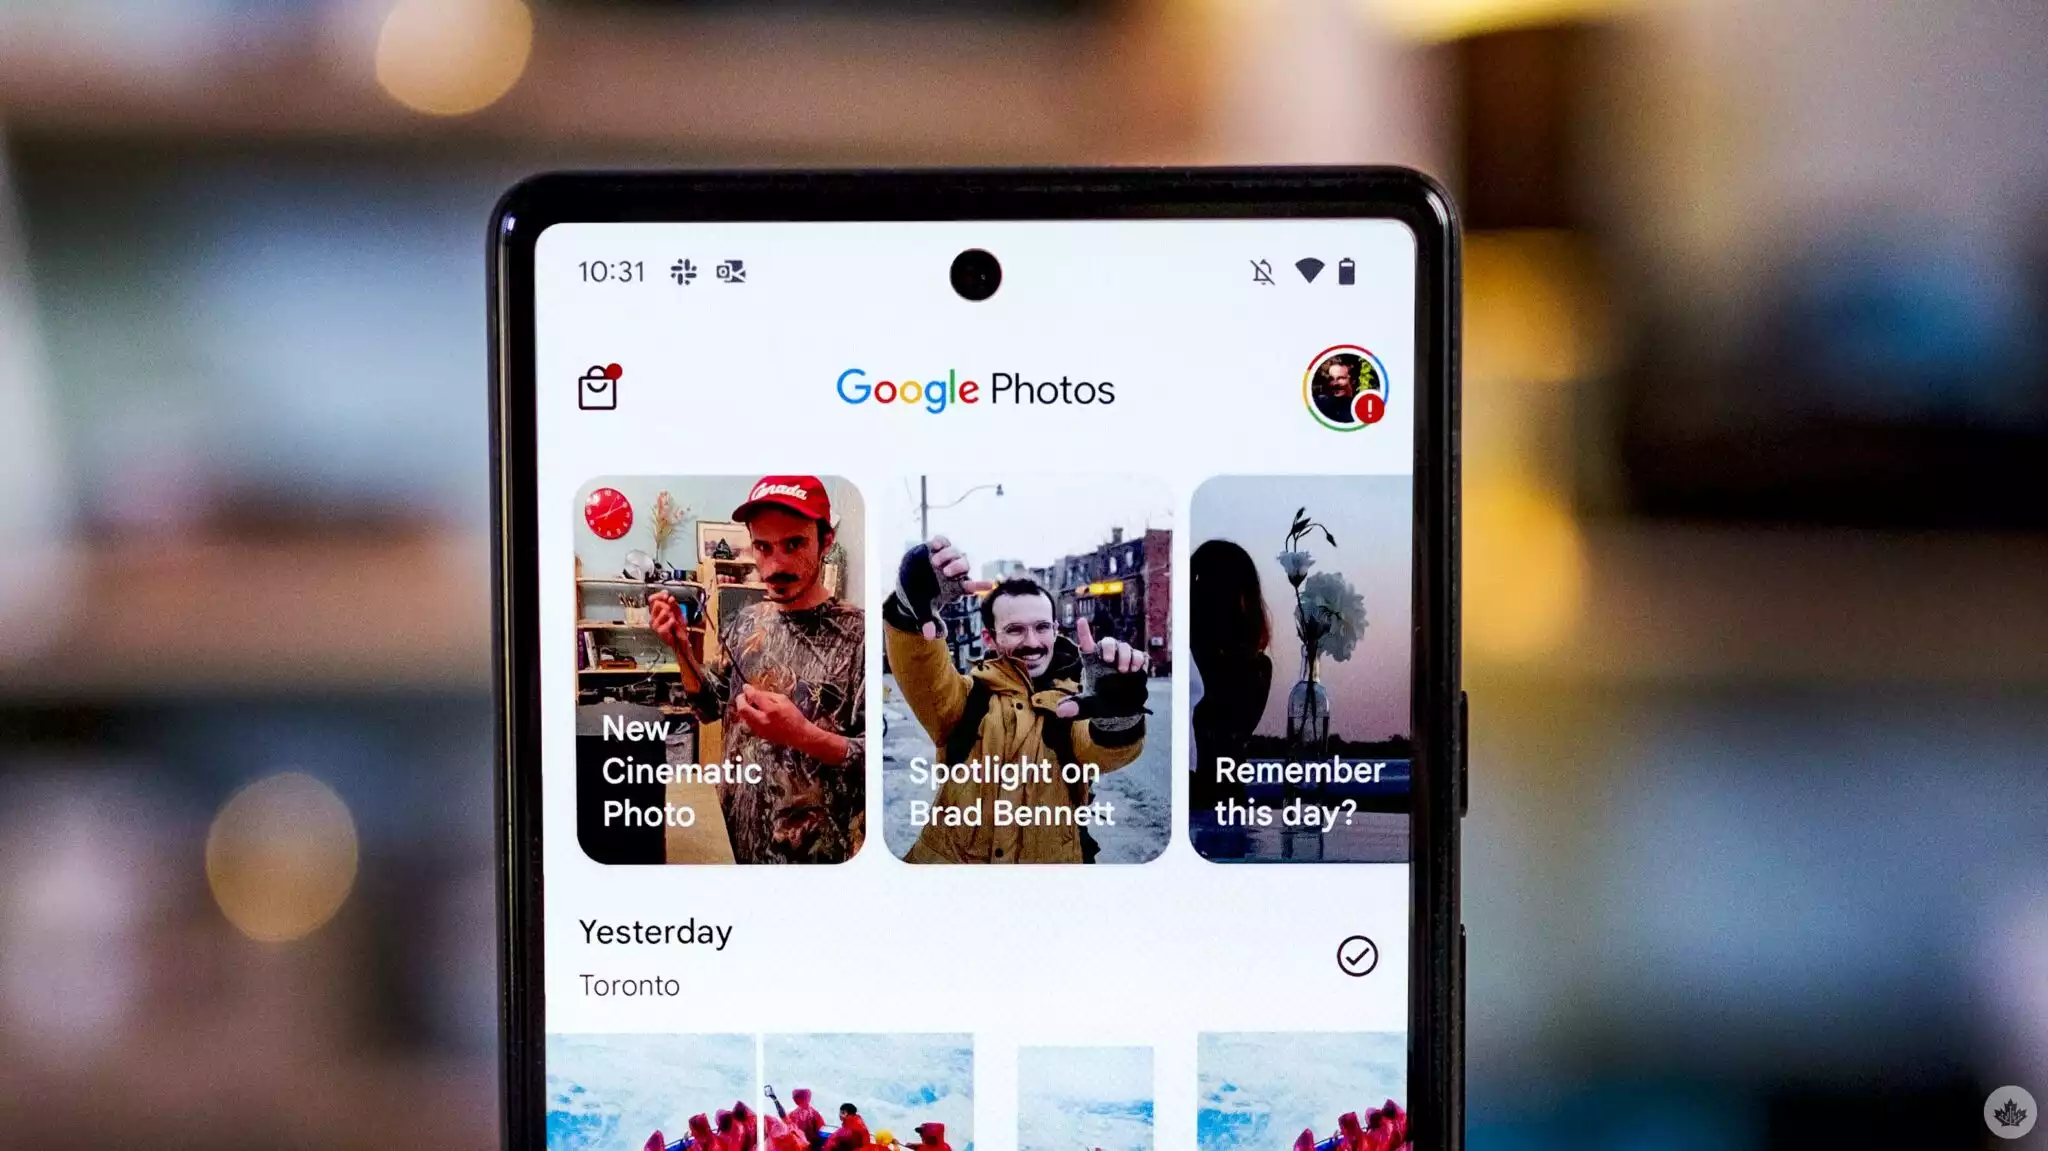 There's a hidden folder in Google Photos you likely don't know about